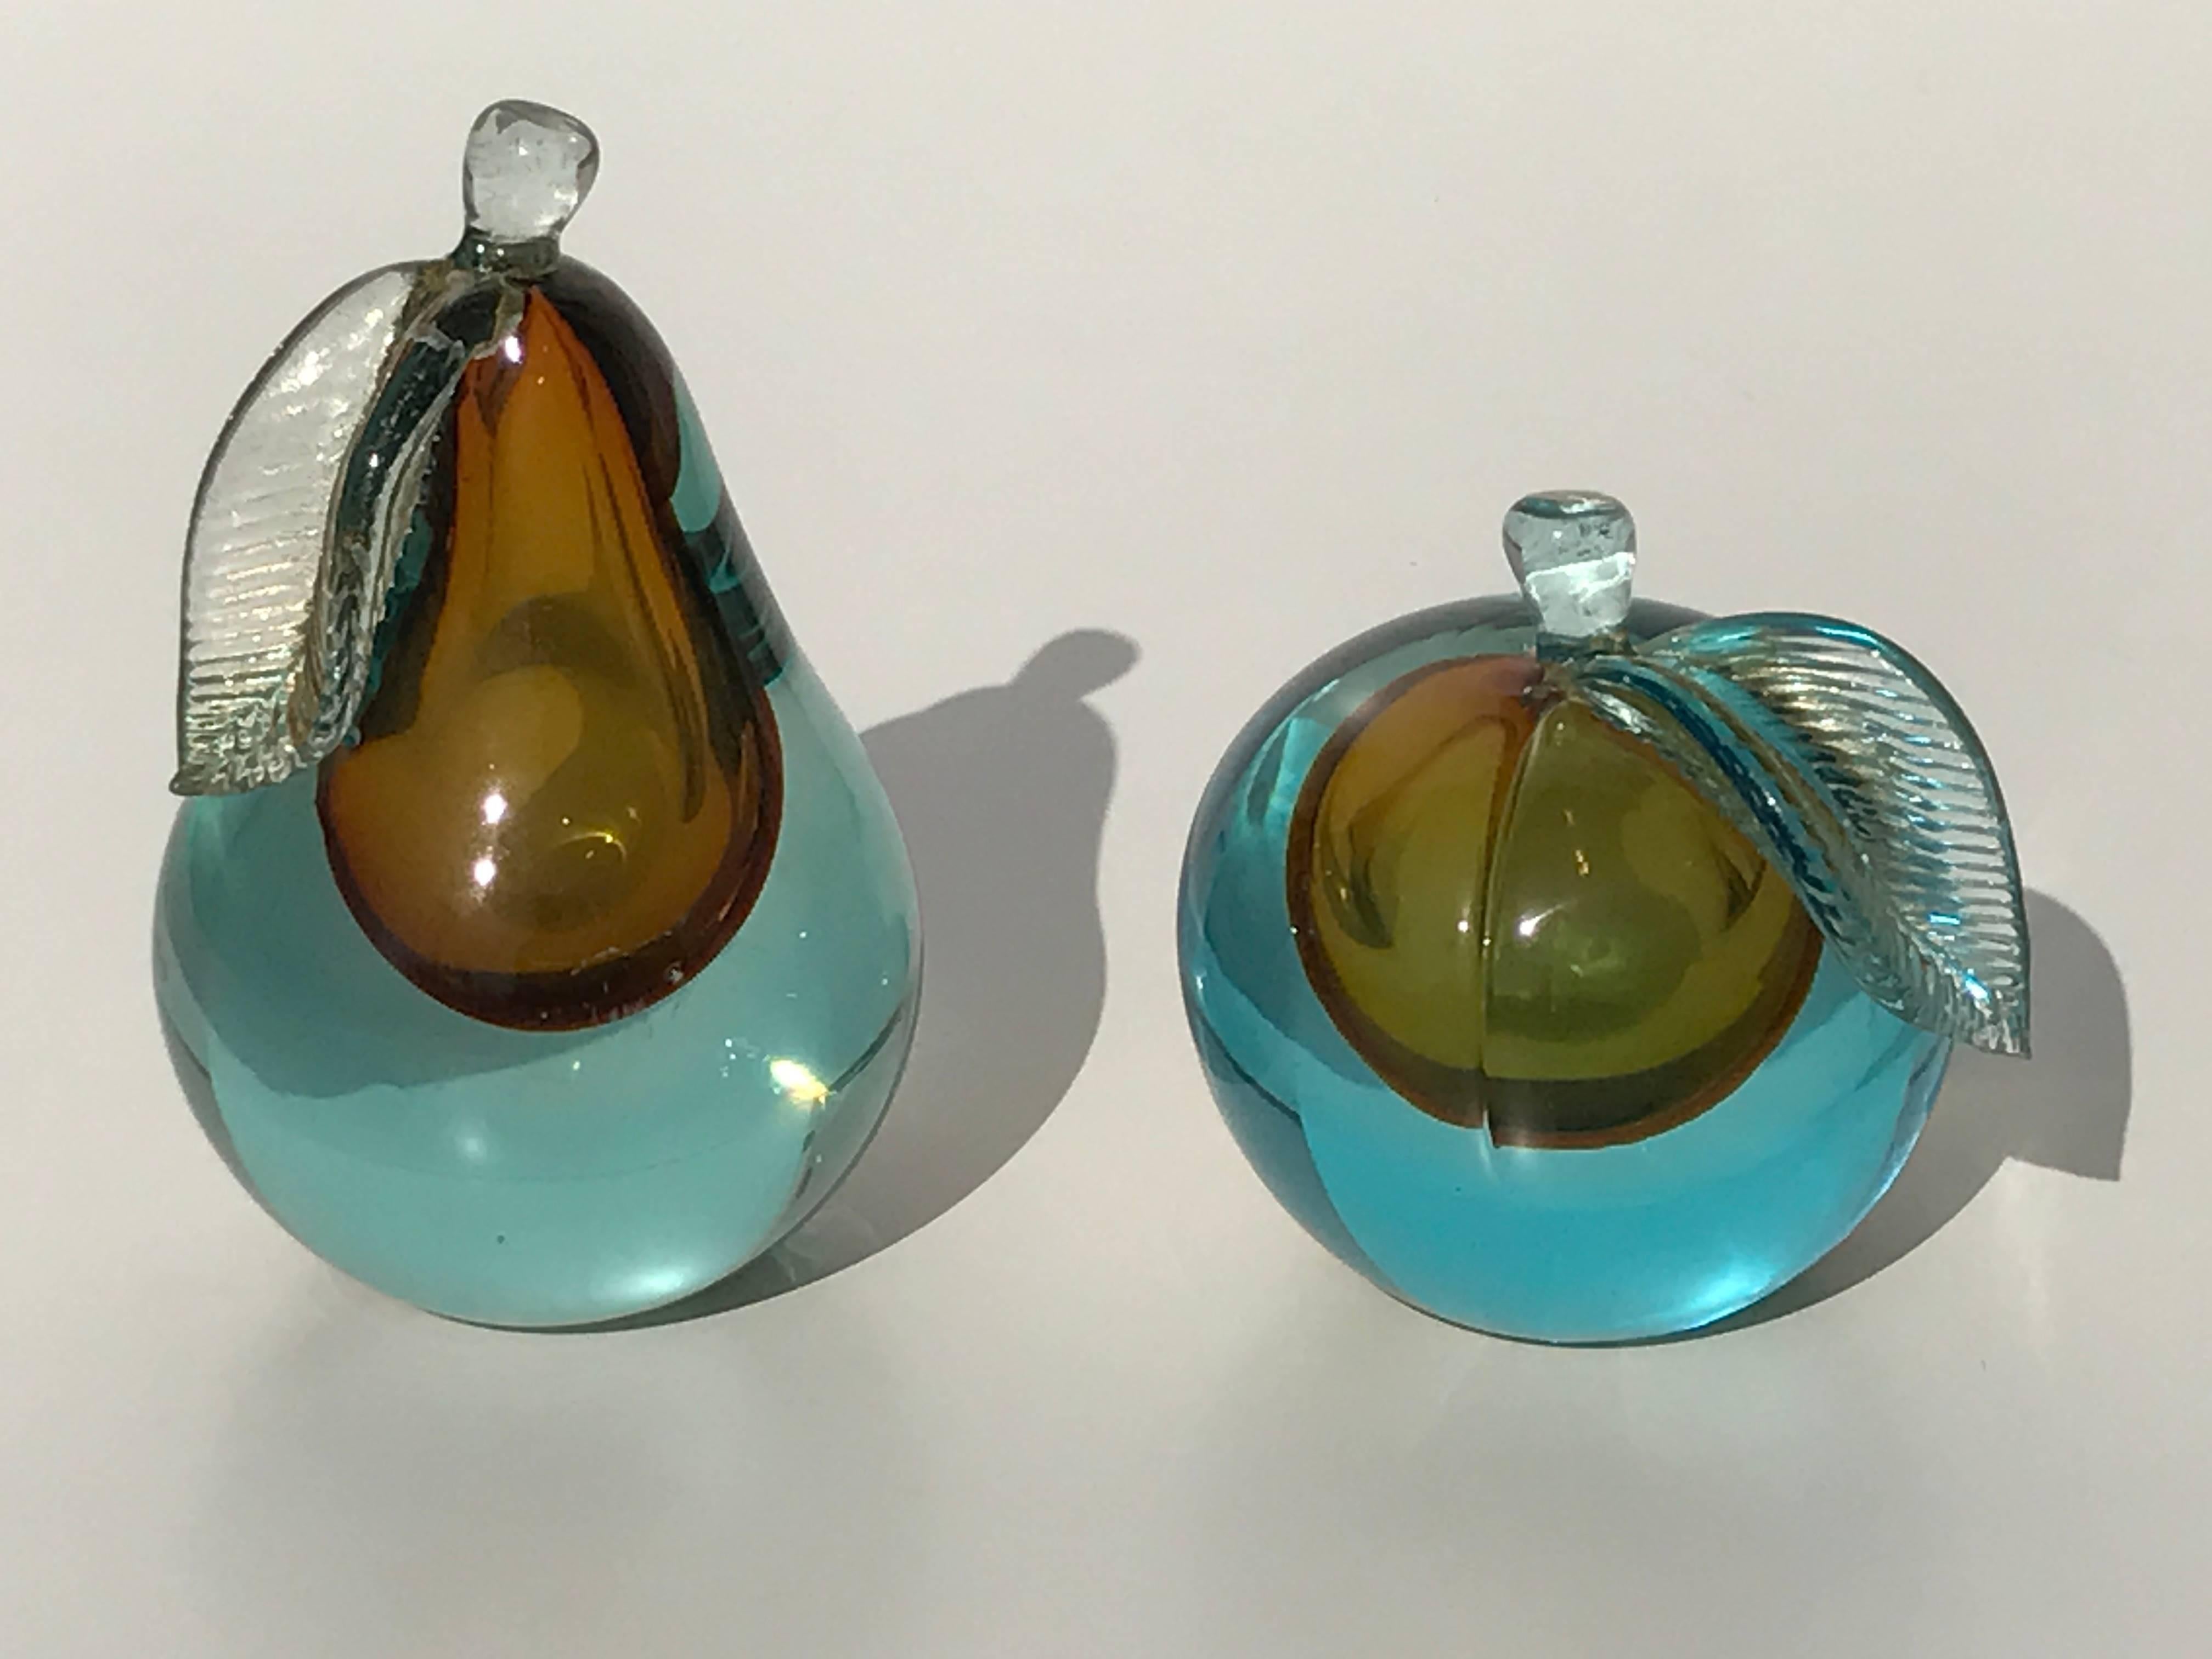 Set of vintage Murano glass apple and pear bookends
Measures: Pear is 7